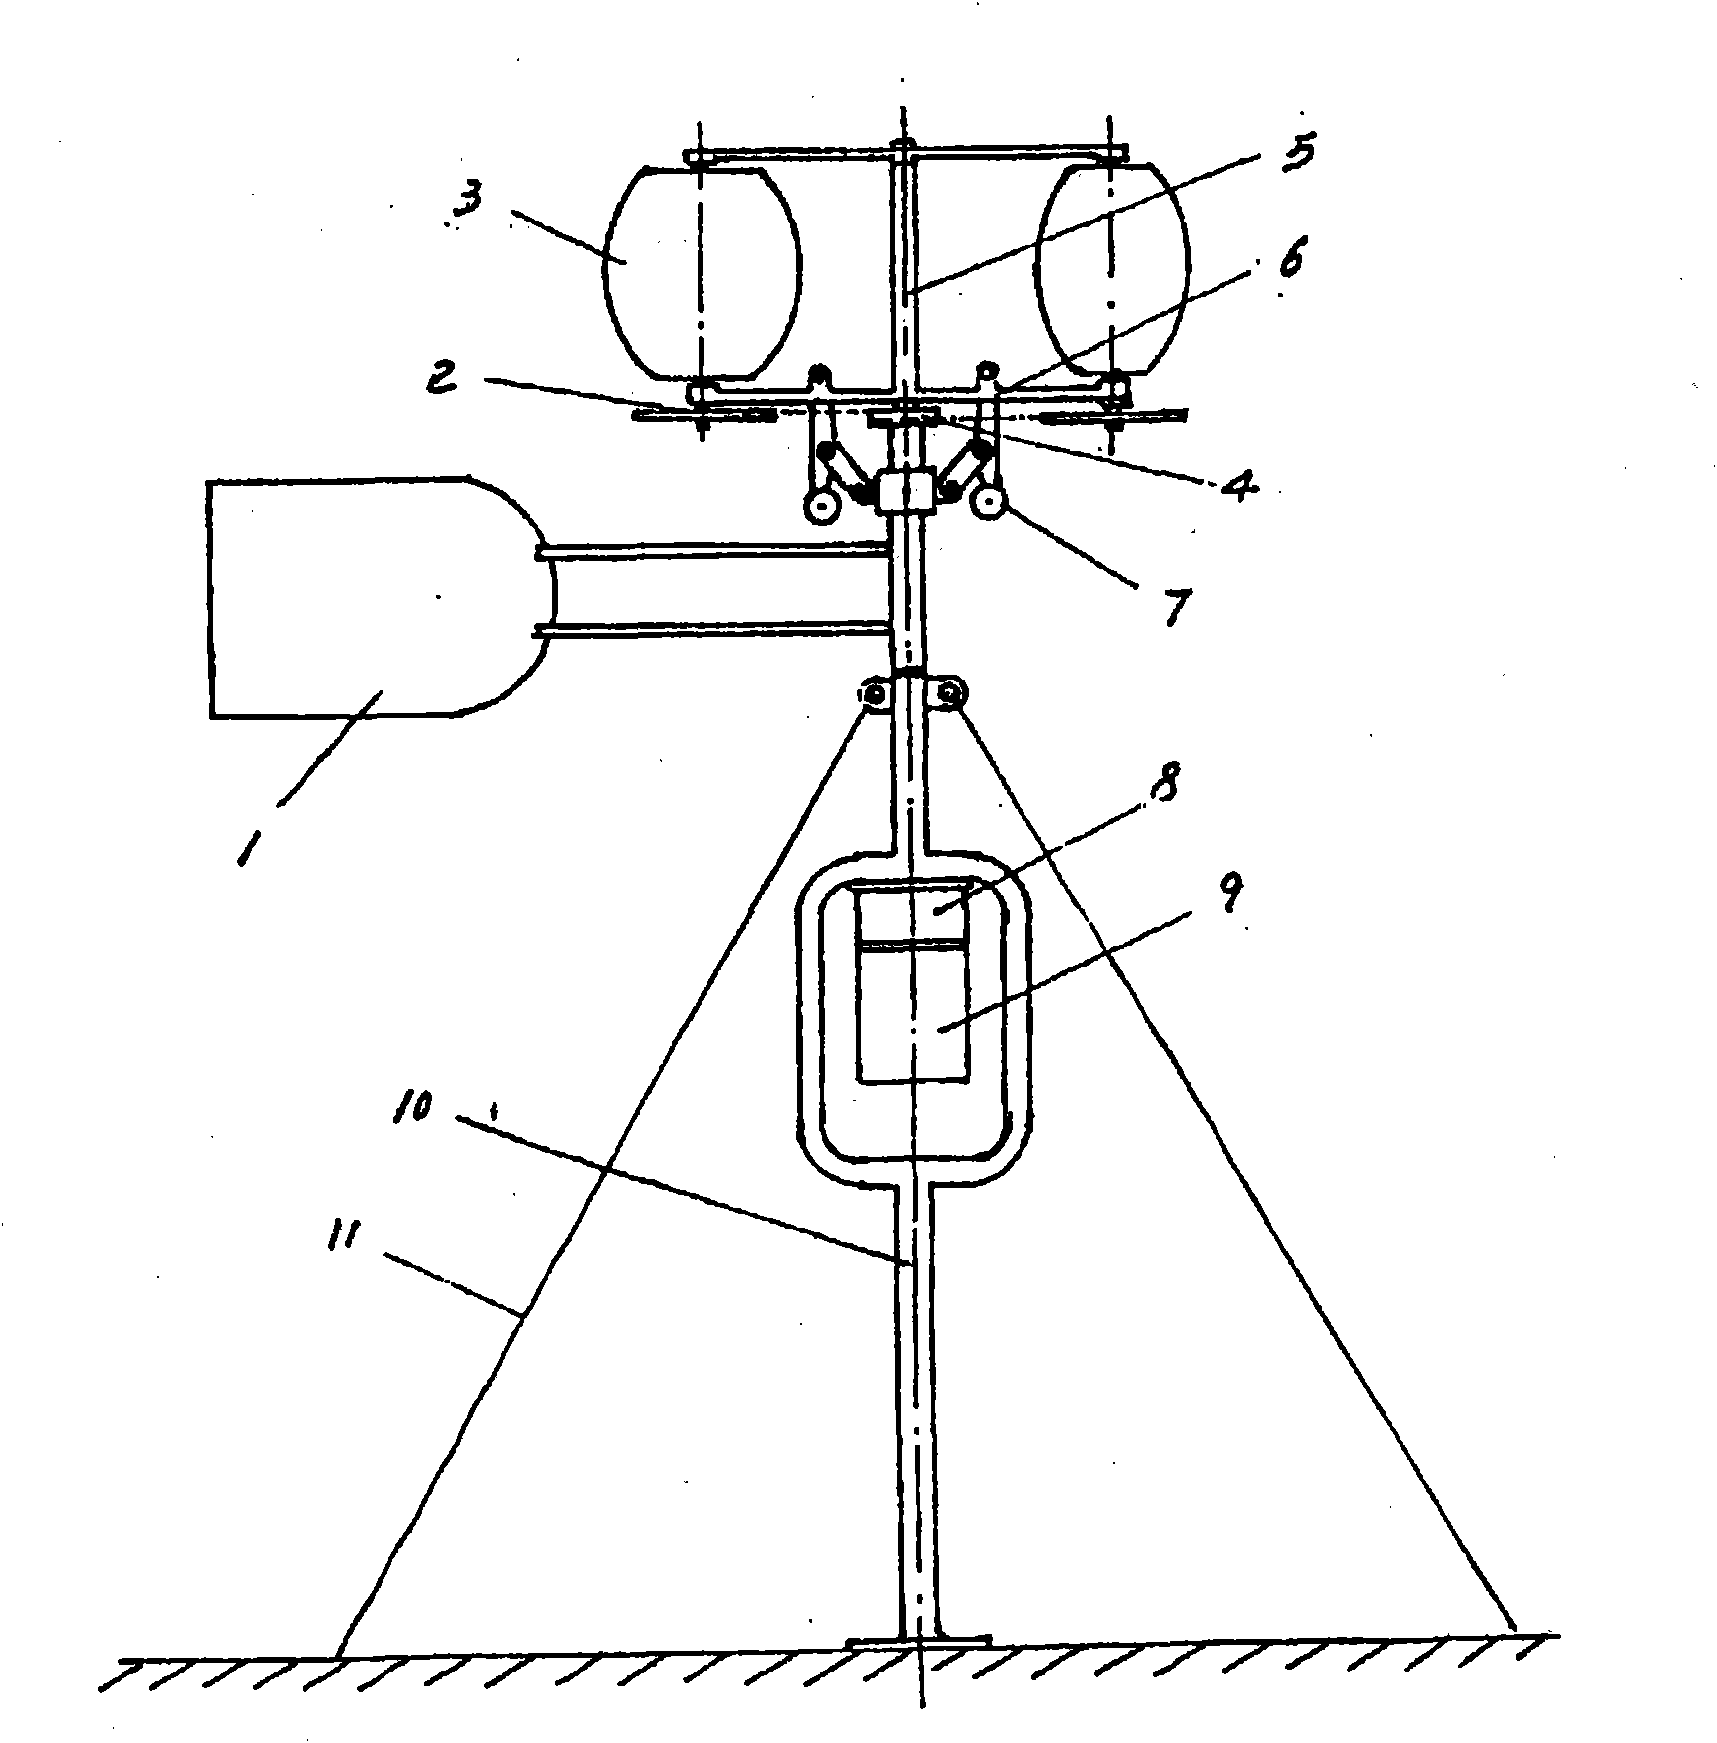 Wind-driven generator with rotary blades